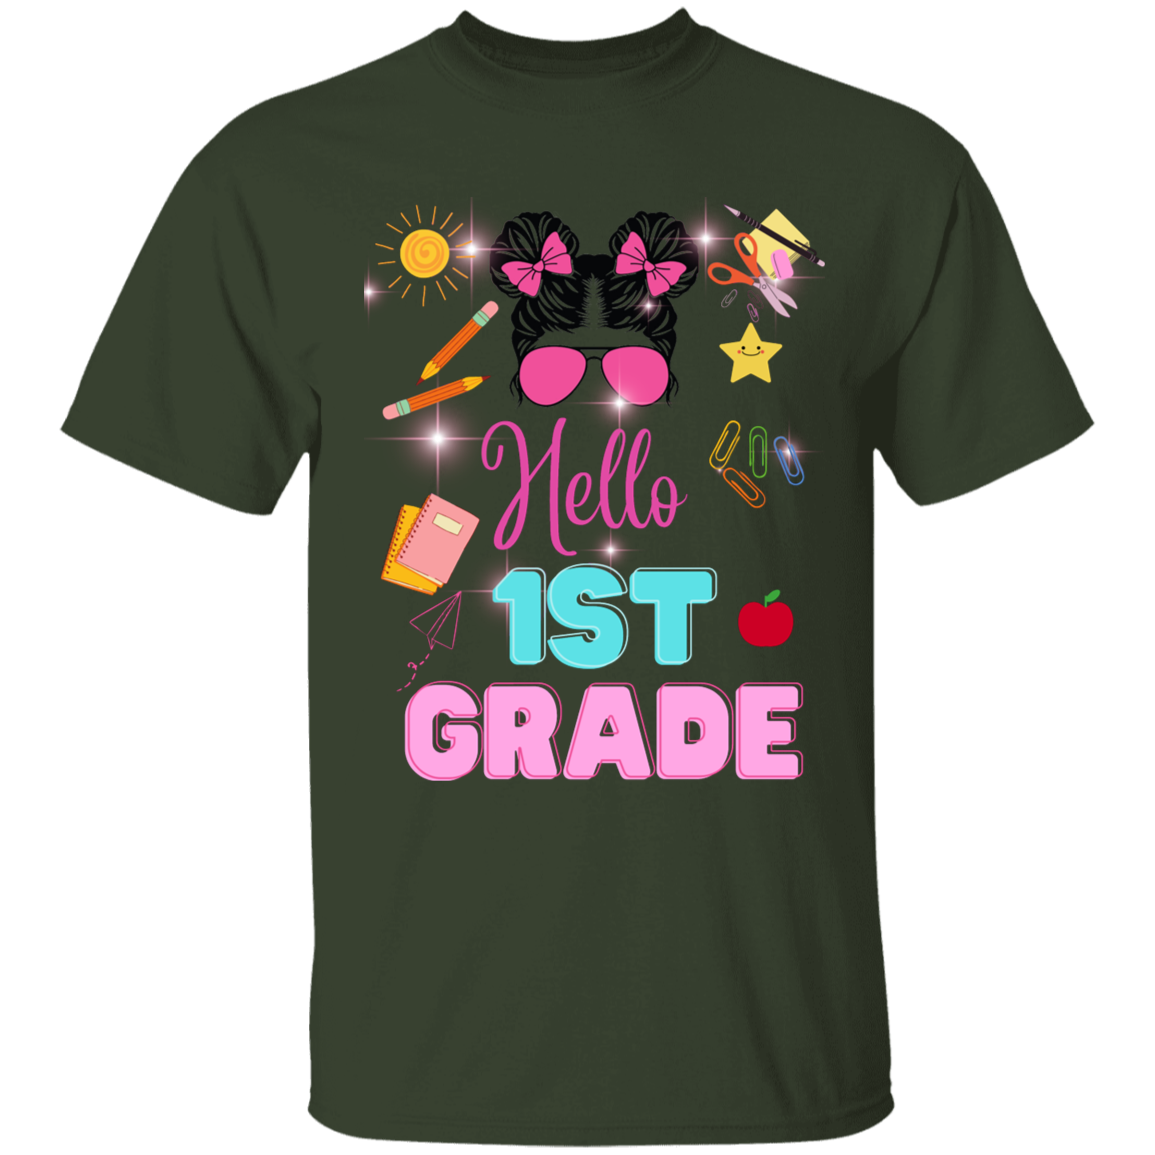 Youth First Grade t-shirt,Back to school  tee for kids  100% Cotton